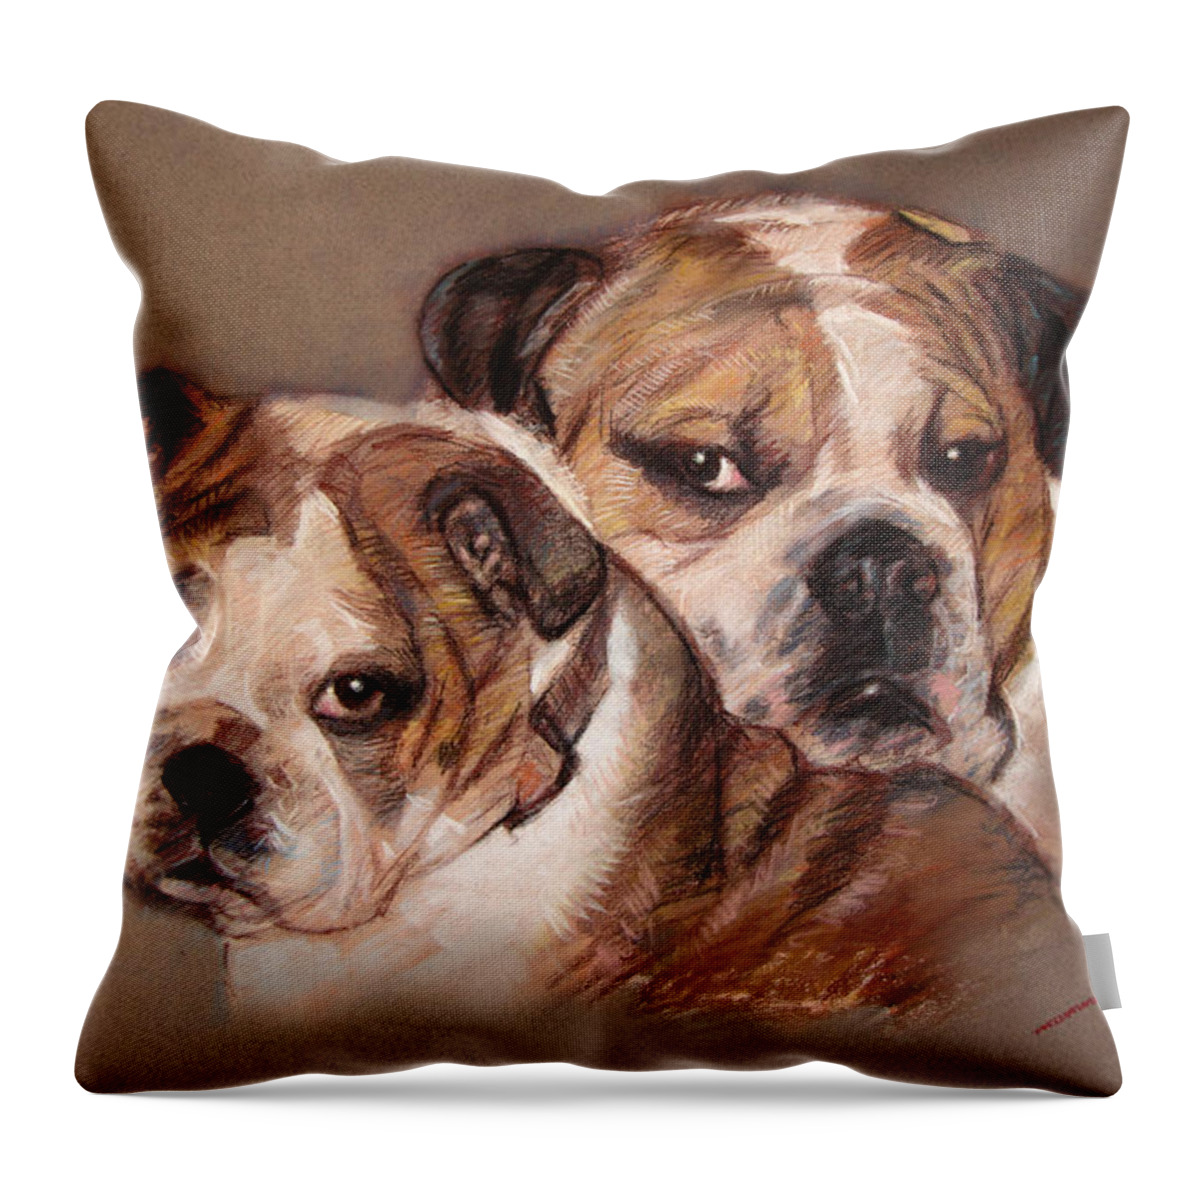 Bulldogs Throw Pillow featuring the pastel Bulldogs by Ylli Haruni